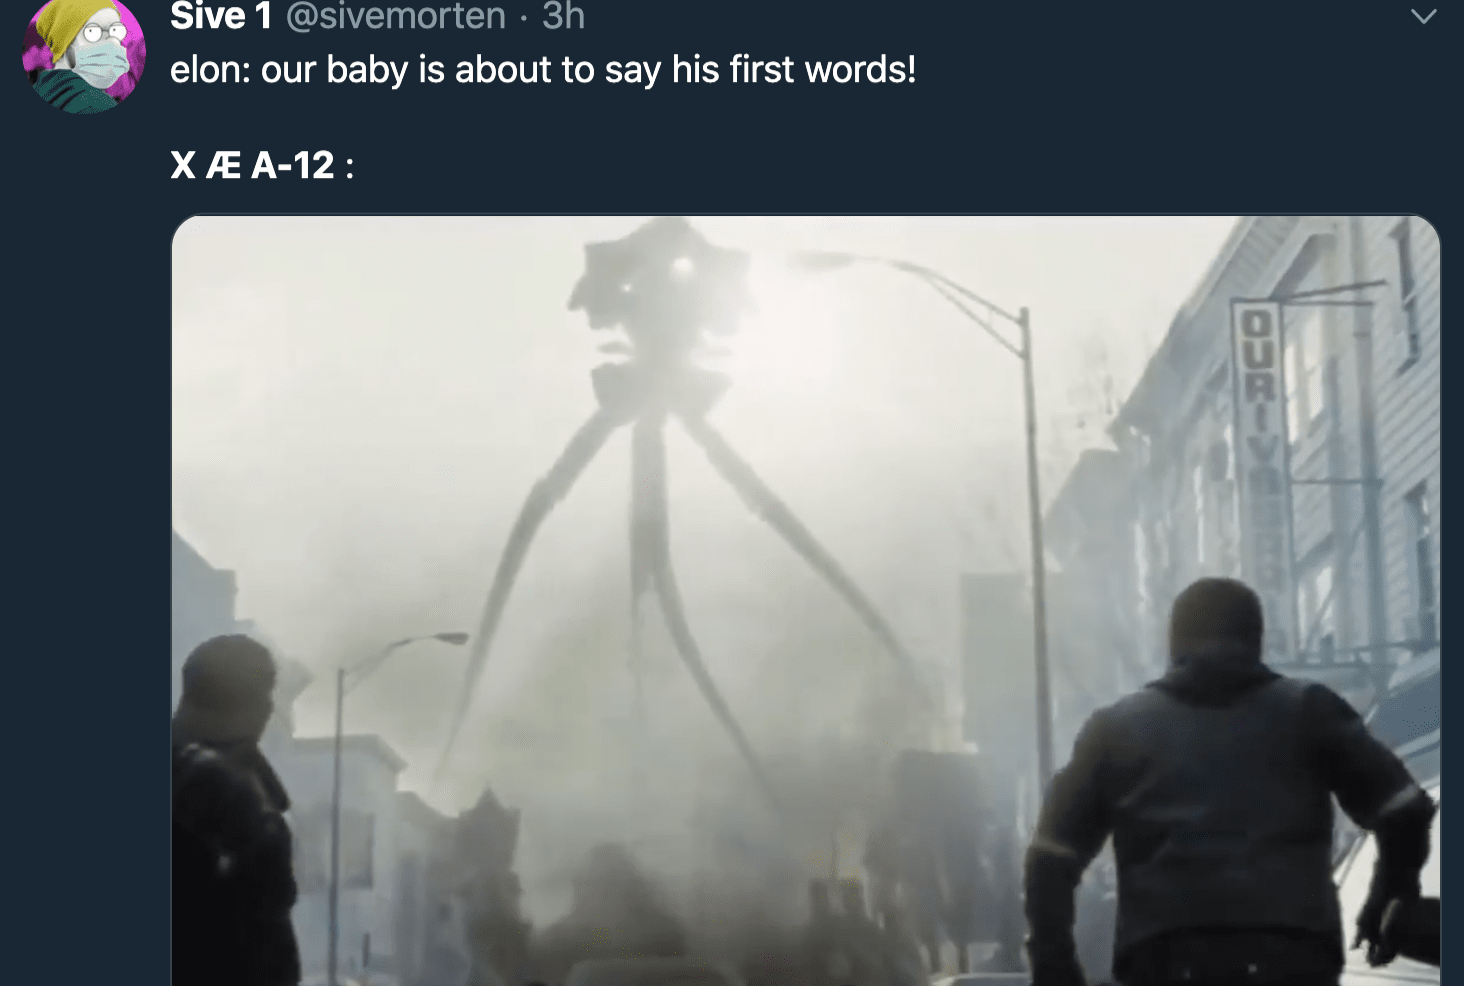 X Æ A-12 - war of the worlds tripod - Sive 1 3h elon our baby is about to say his first words! X A12